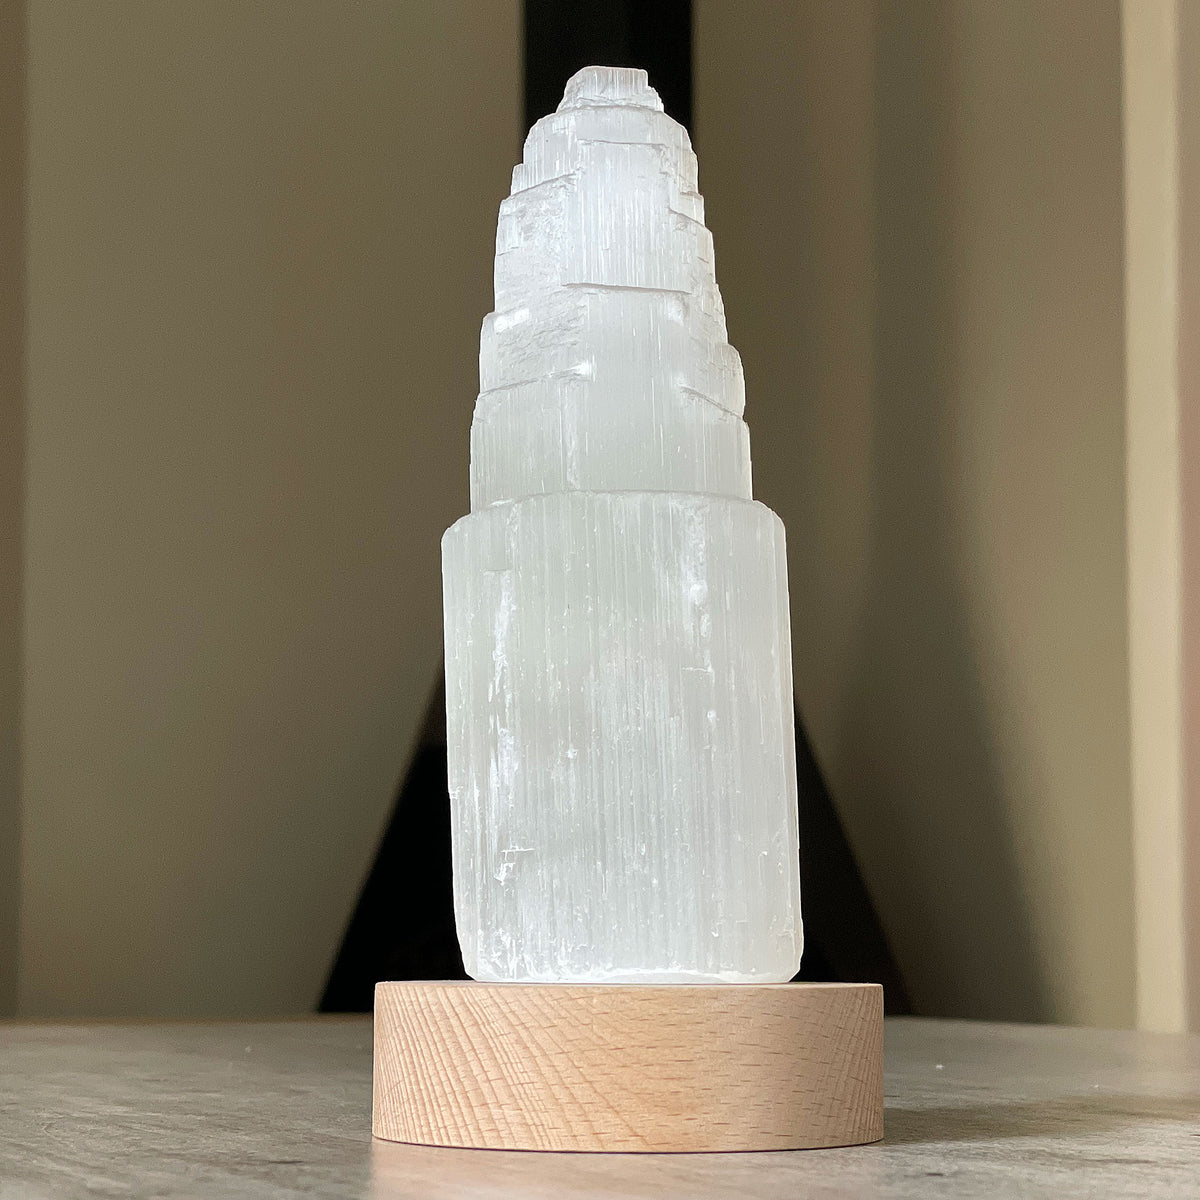 Selenite Lamp - Tower Small - Selenite is a beautiful and versatile crystal that offers numerous benefits, making it a popular choice for both decor and holistic purposes. Its natural beauty and unique translucent appearance make it an eye-catching addition to any home. Selenite emits a soft and warm glow, which makes it an excellent choice for a night light. 